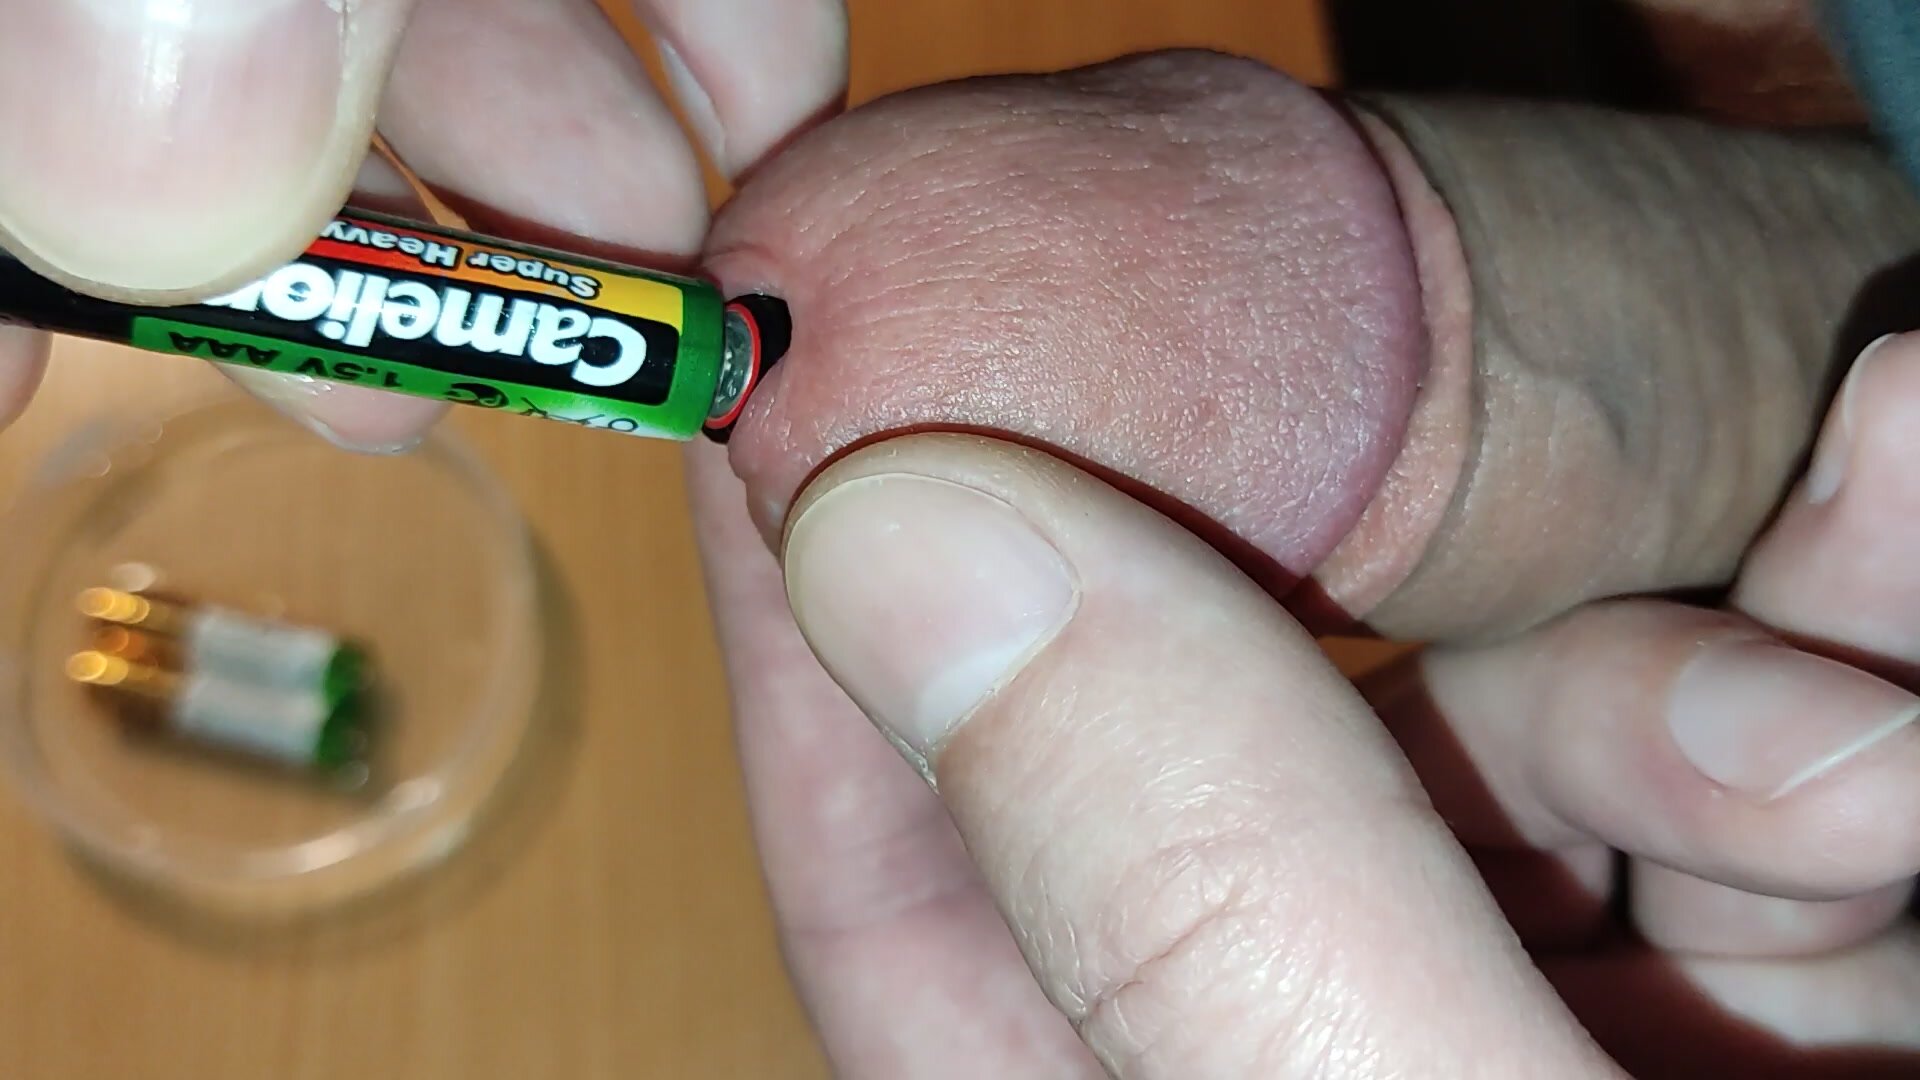 Four AAA batteries without lubrication